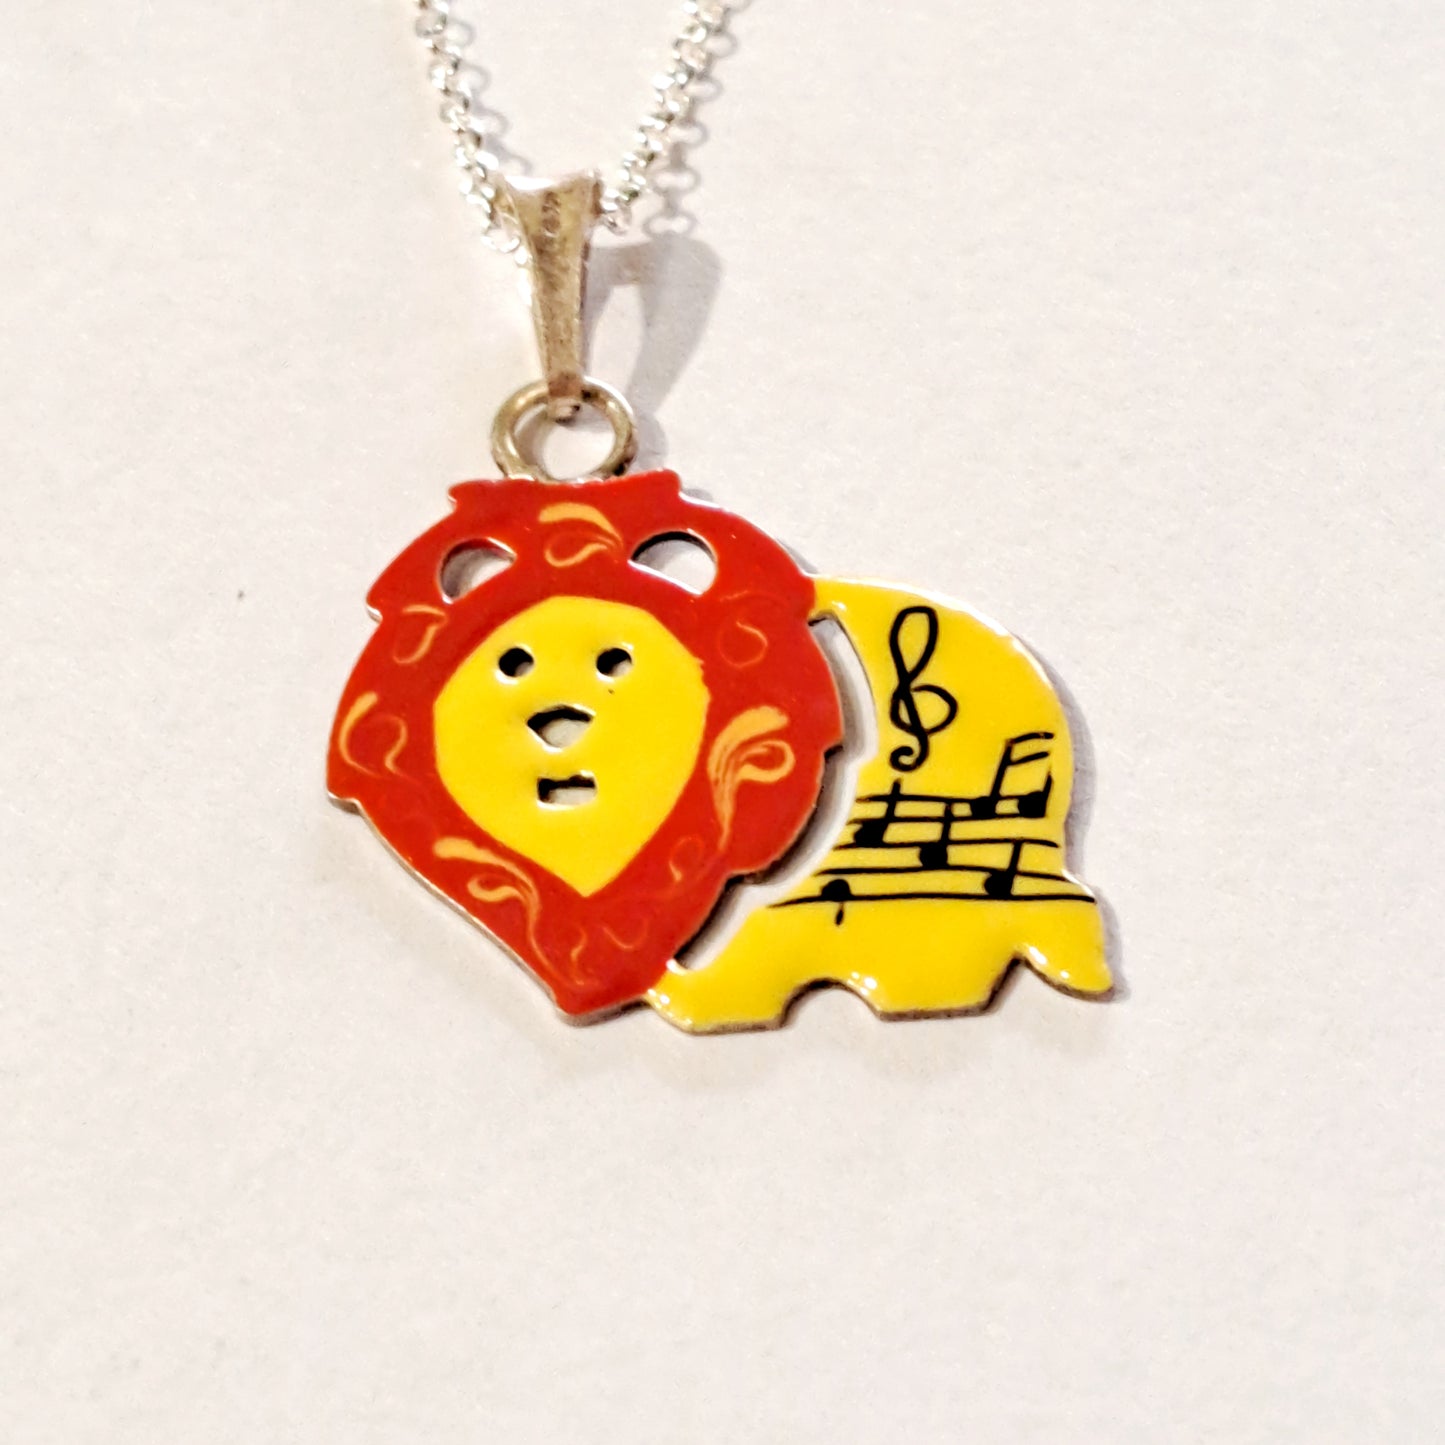 Lion silver necklace painted with yellow and red colors